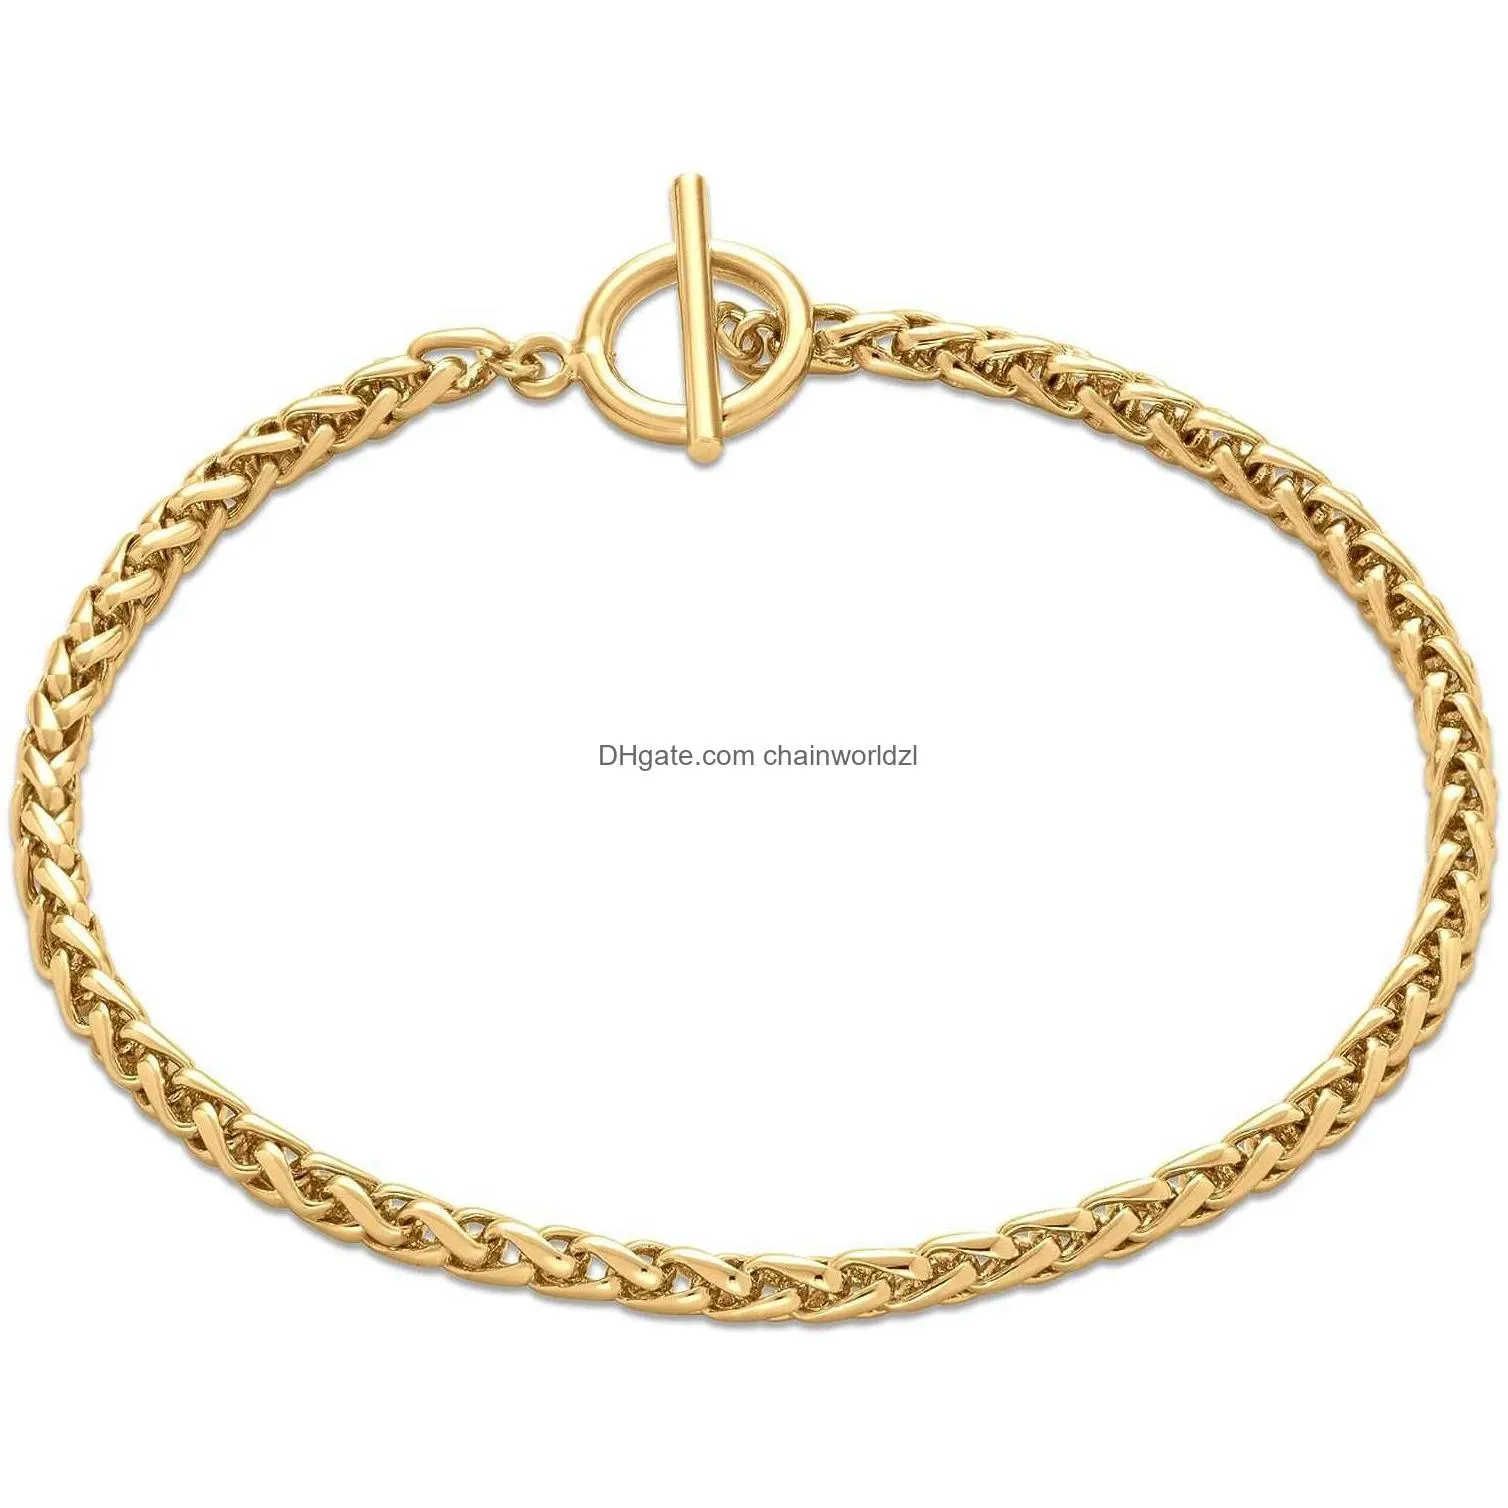 essentials 14k gold plated or silver plated braided chain bracelet 7.5